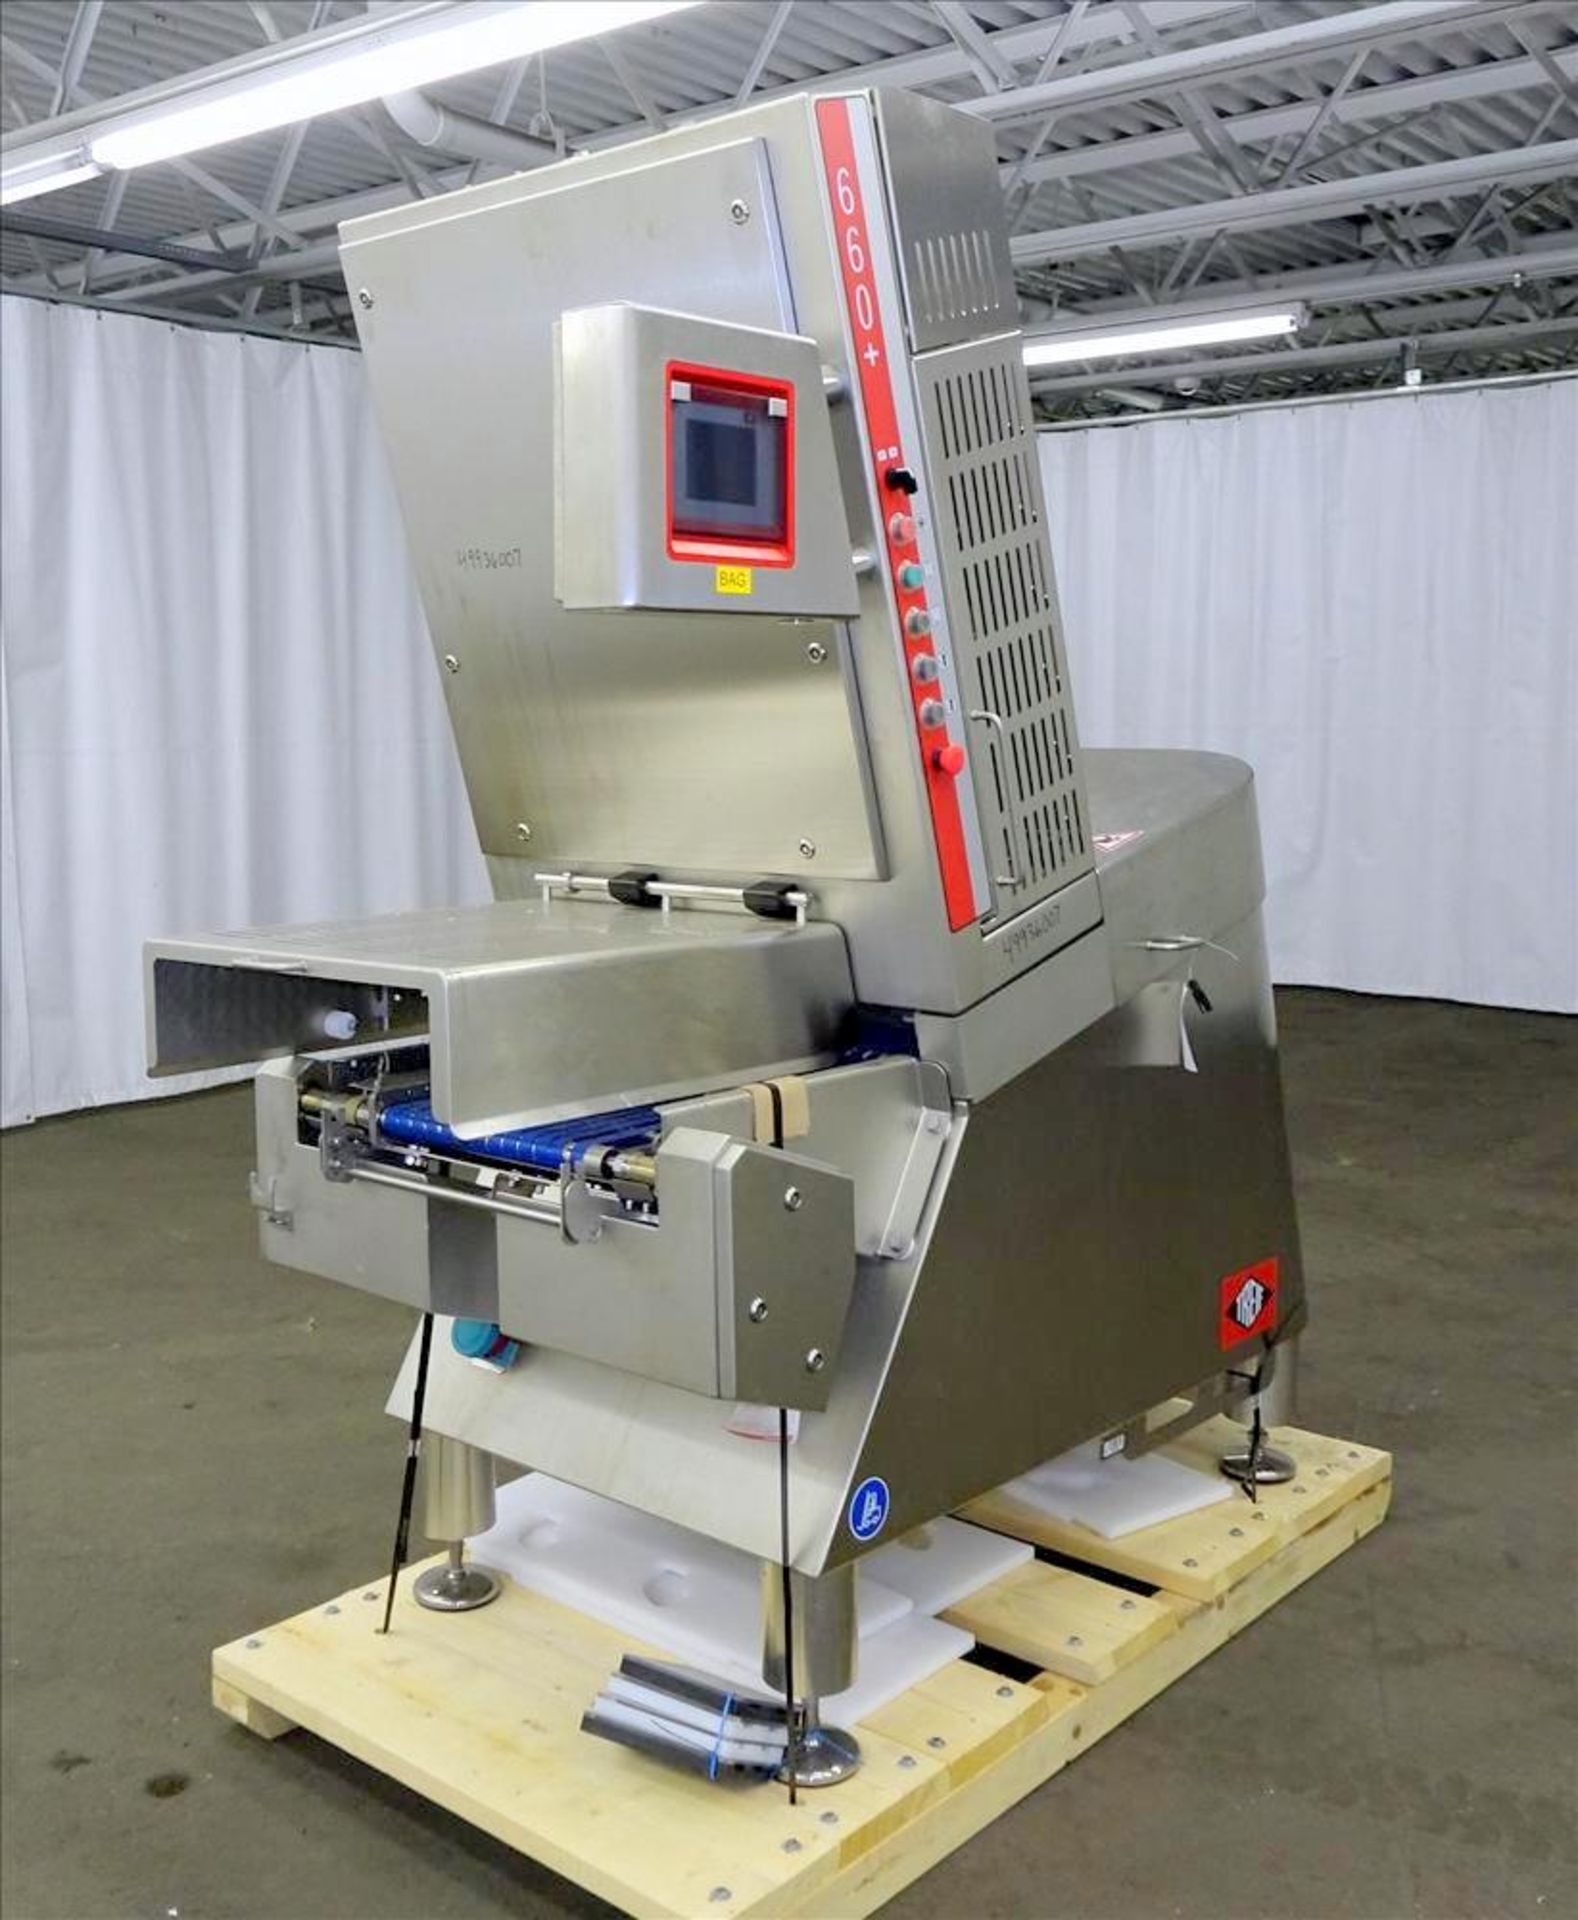 Treif Slicer, Model Divider 660+. 320 x 130 mm / 280 x 160 mm infeed chamber. Serial # 660000 - Image 9 of 16